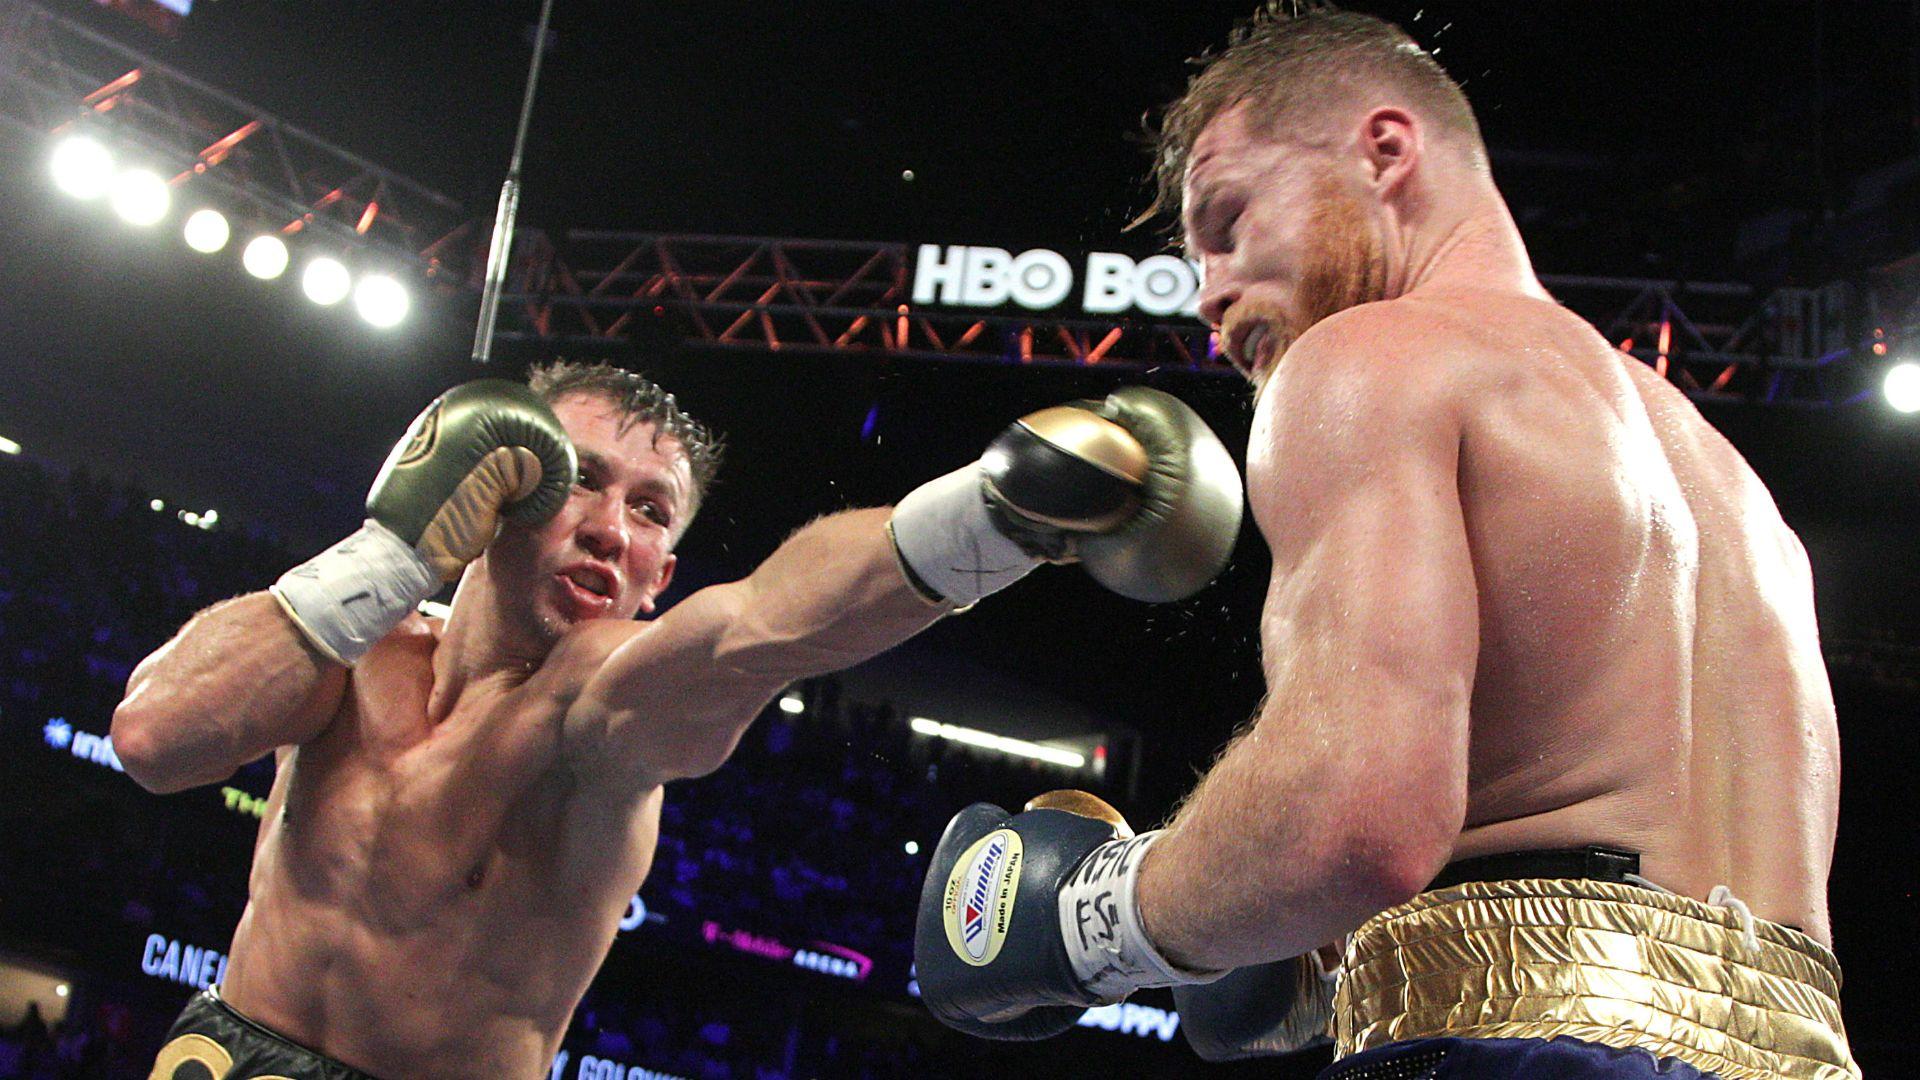 Canelo Alvarez Gennady Golovkin 2 Officially On For May 5. BOXING